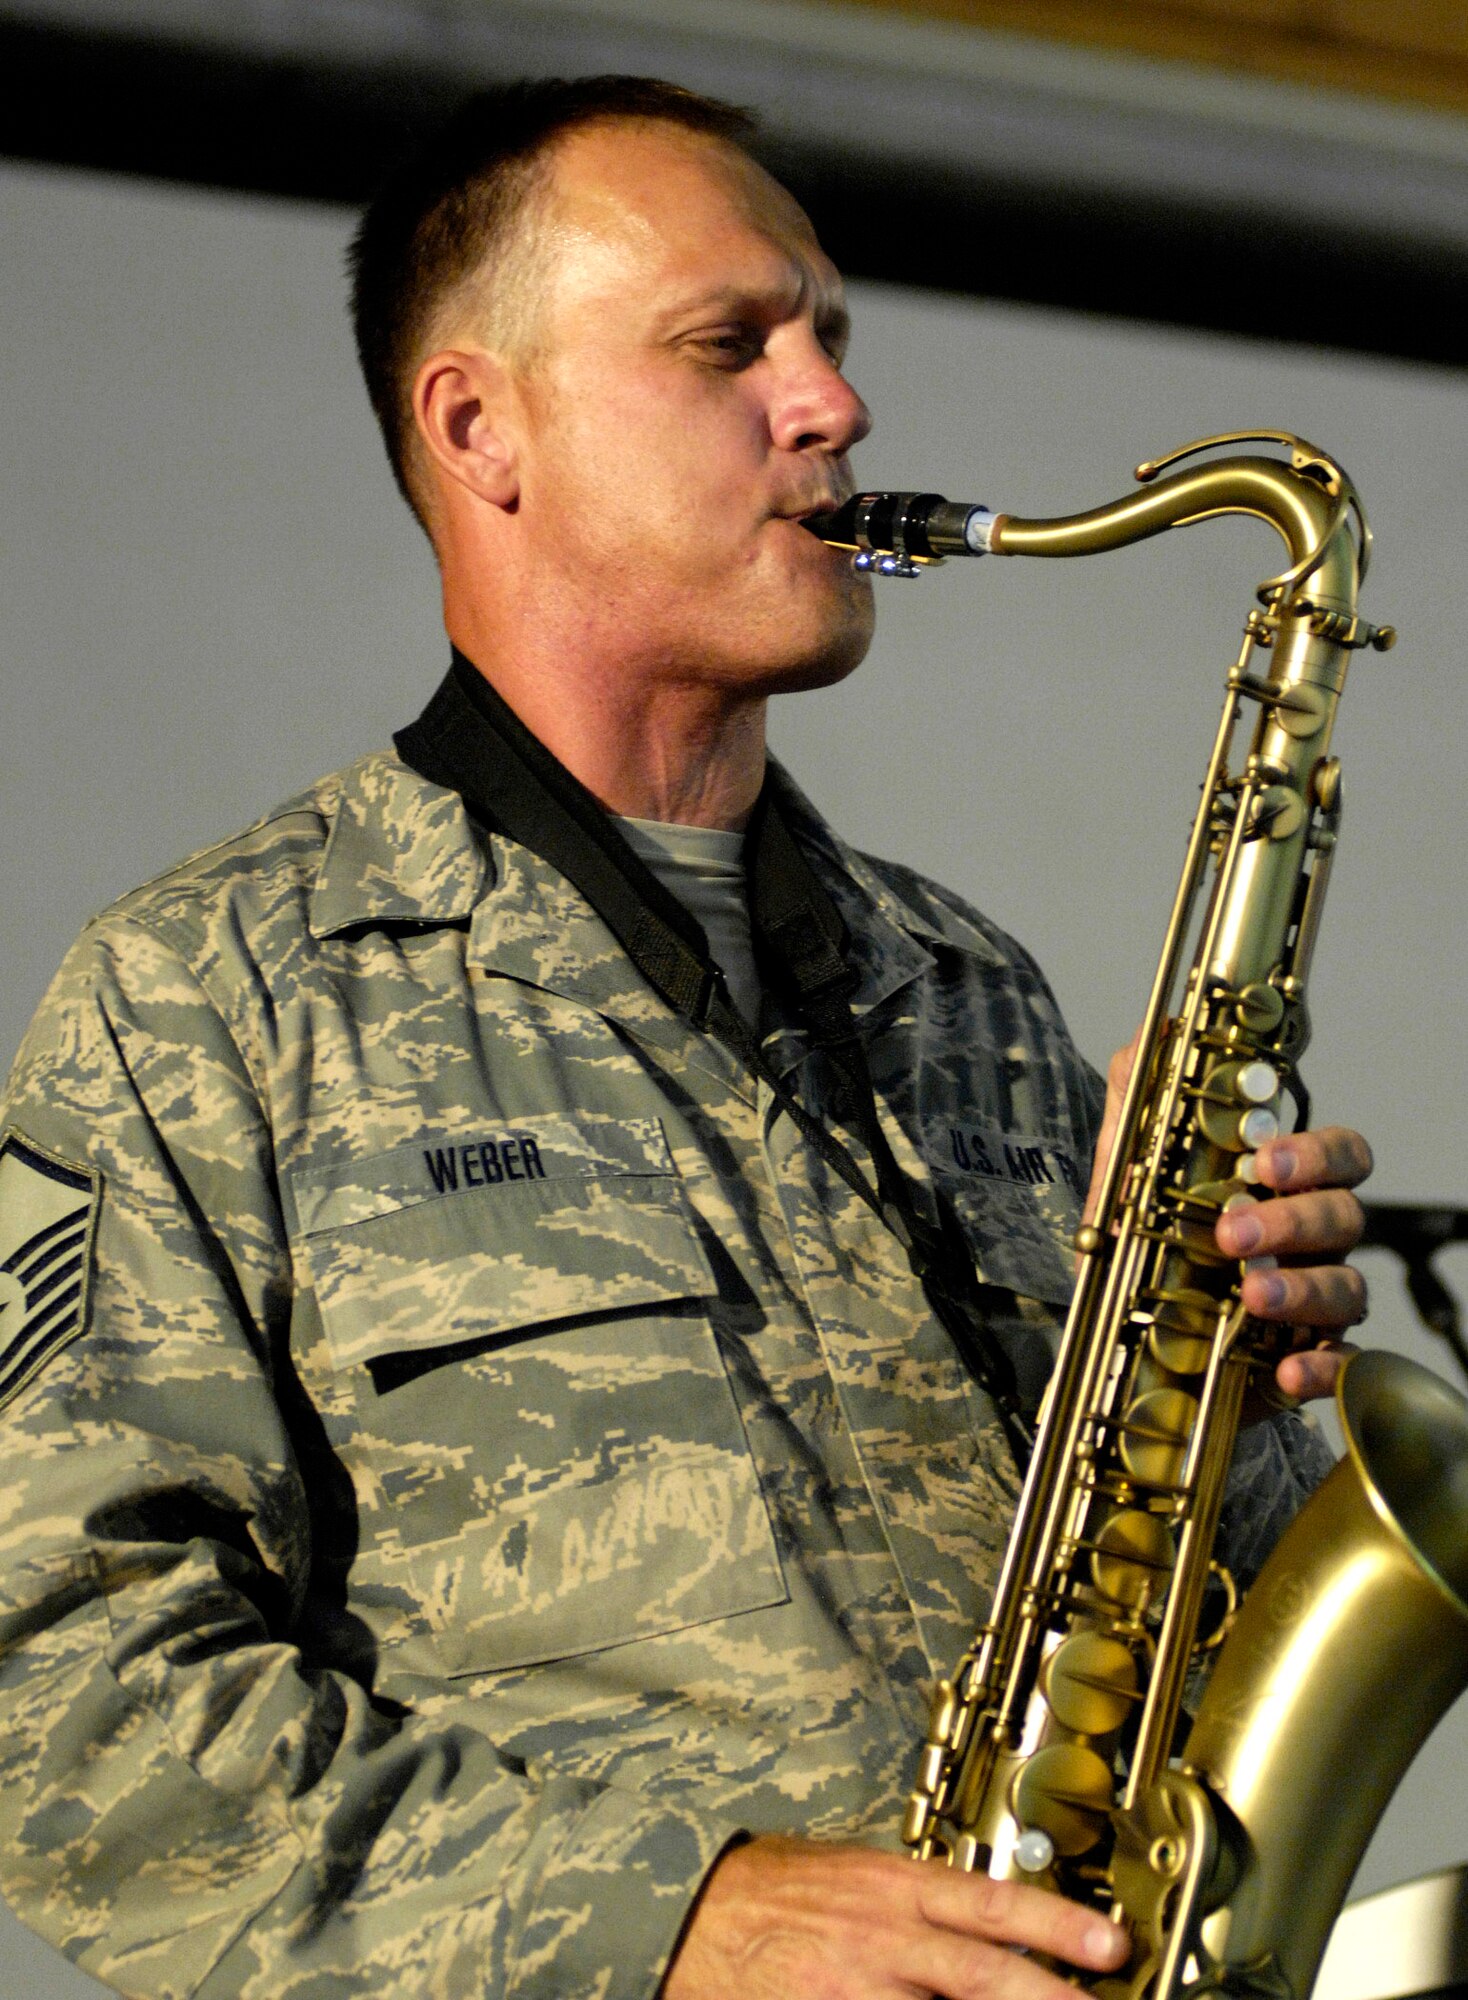 Master Sgt. Daniel Weber plays a solo during a show June 22 at Bagram Air Base, Afghanistan. The U.S. Air Forces Central Band "Falcon" band travels throughout the area of responsibility to positively promote troop morale and to reach out to host nation communities. Sergeant Weber is a U.S. Air Forces Band "Falcon" saxophonist. (U.S. Air Force photo/Master Sgt. Demetrius Lester)